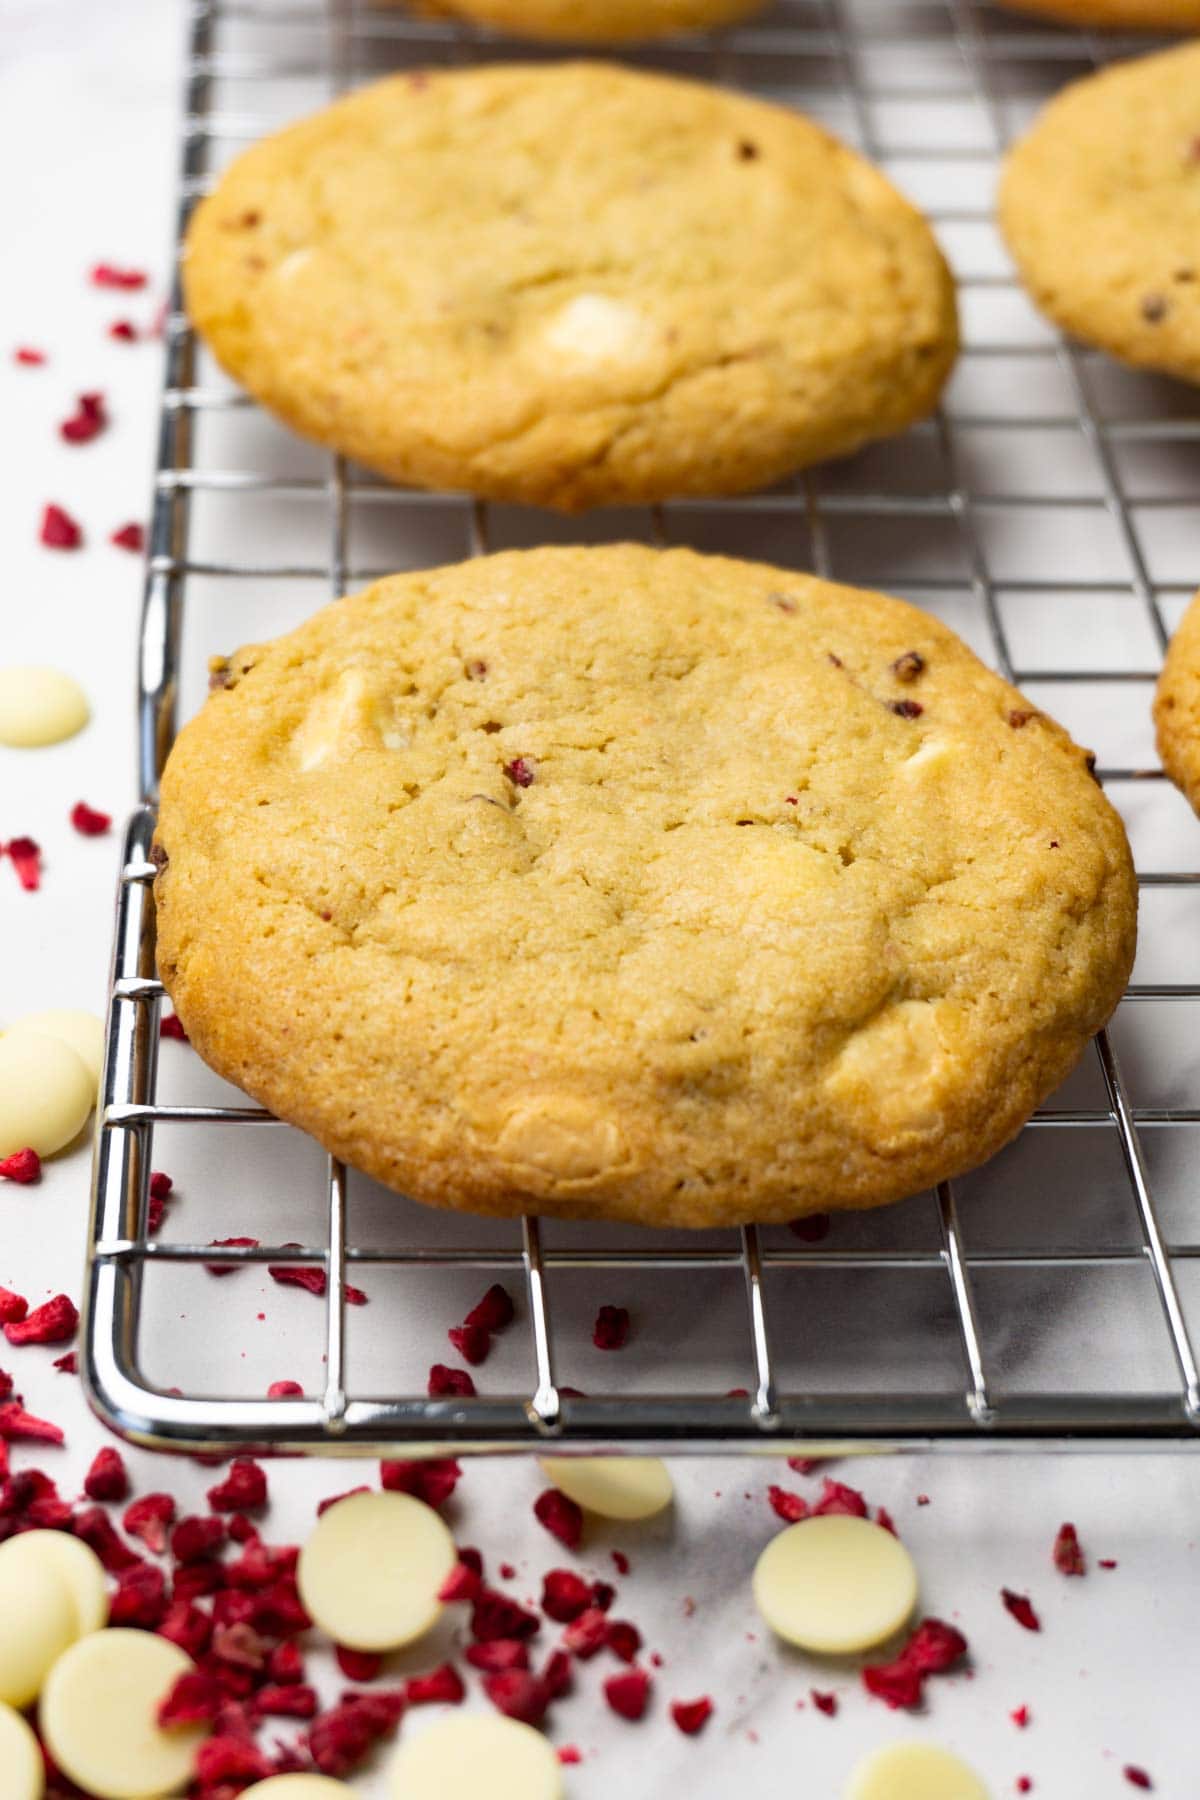 A white chocolate cookies on a cooling rack, white chocolate chips and freeze dried raspberries are lying next to it.